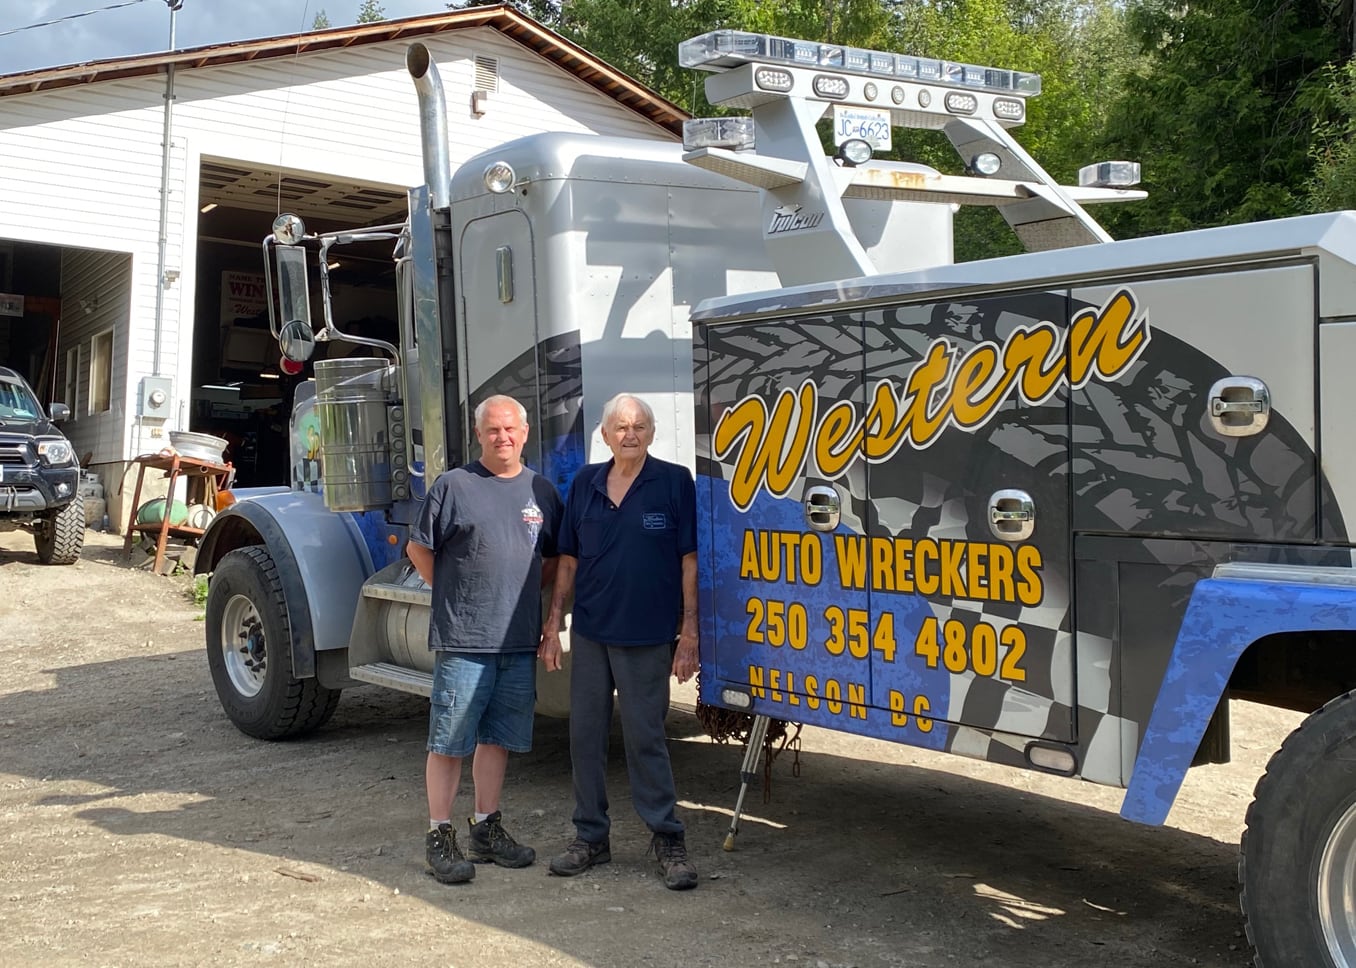 Western Auto Wreckers celebrate 50 years of going the extra mile